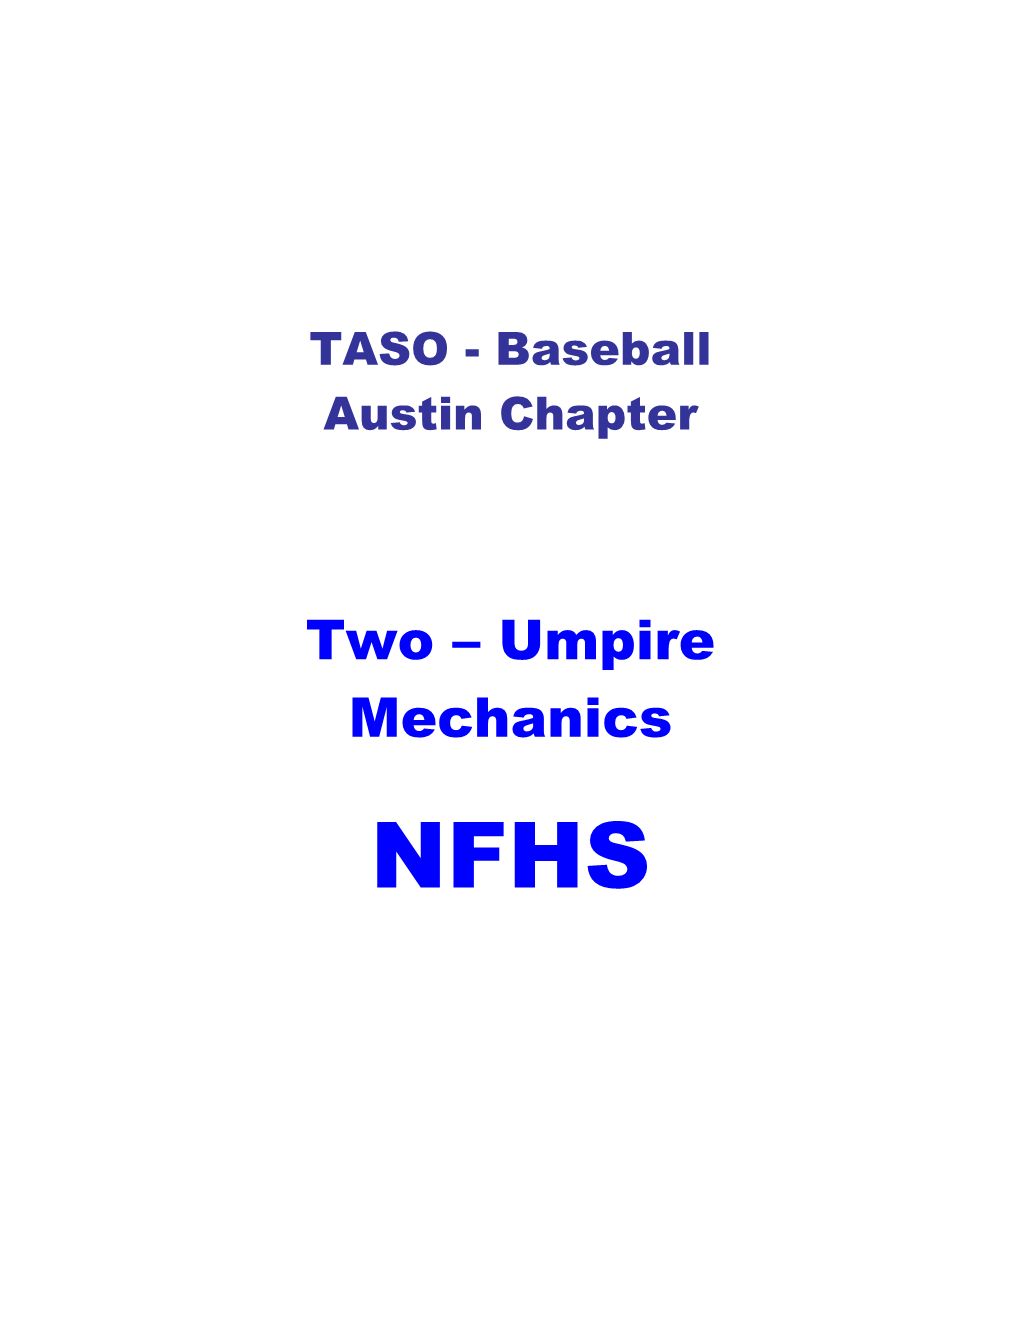 Two – Umpire Mechanics NFHS BASIC UMPIRE NO RUNNERS on POSITIONS Fly Ball Coverage Outfield